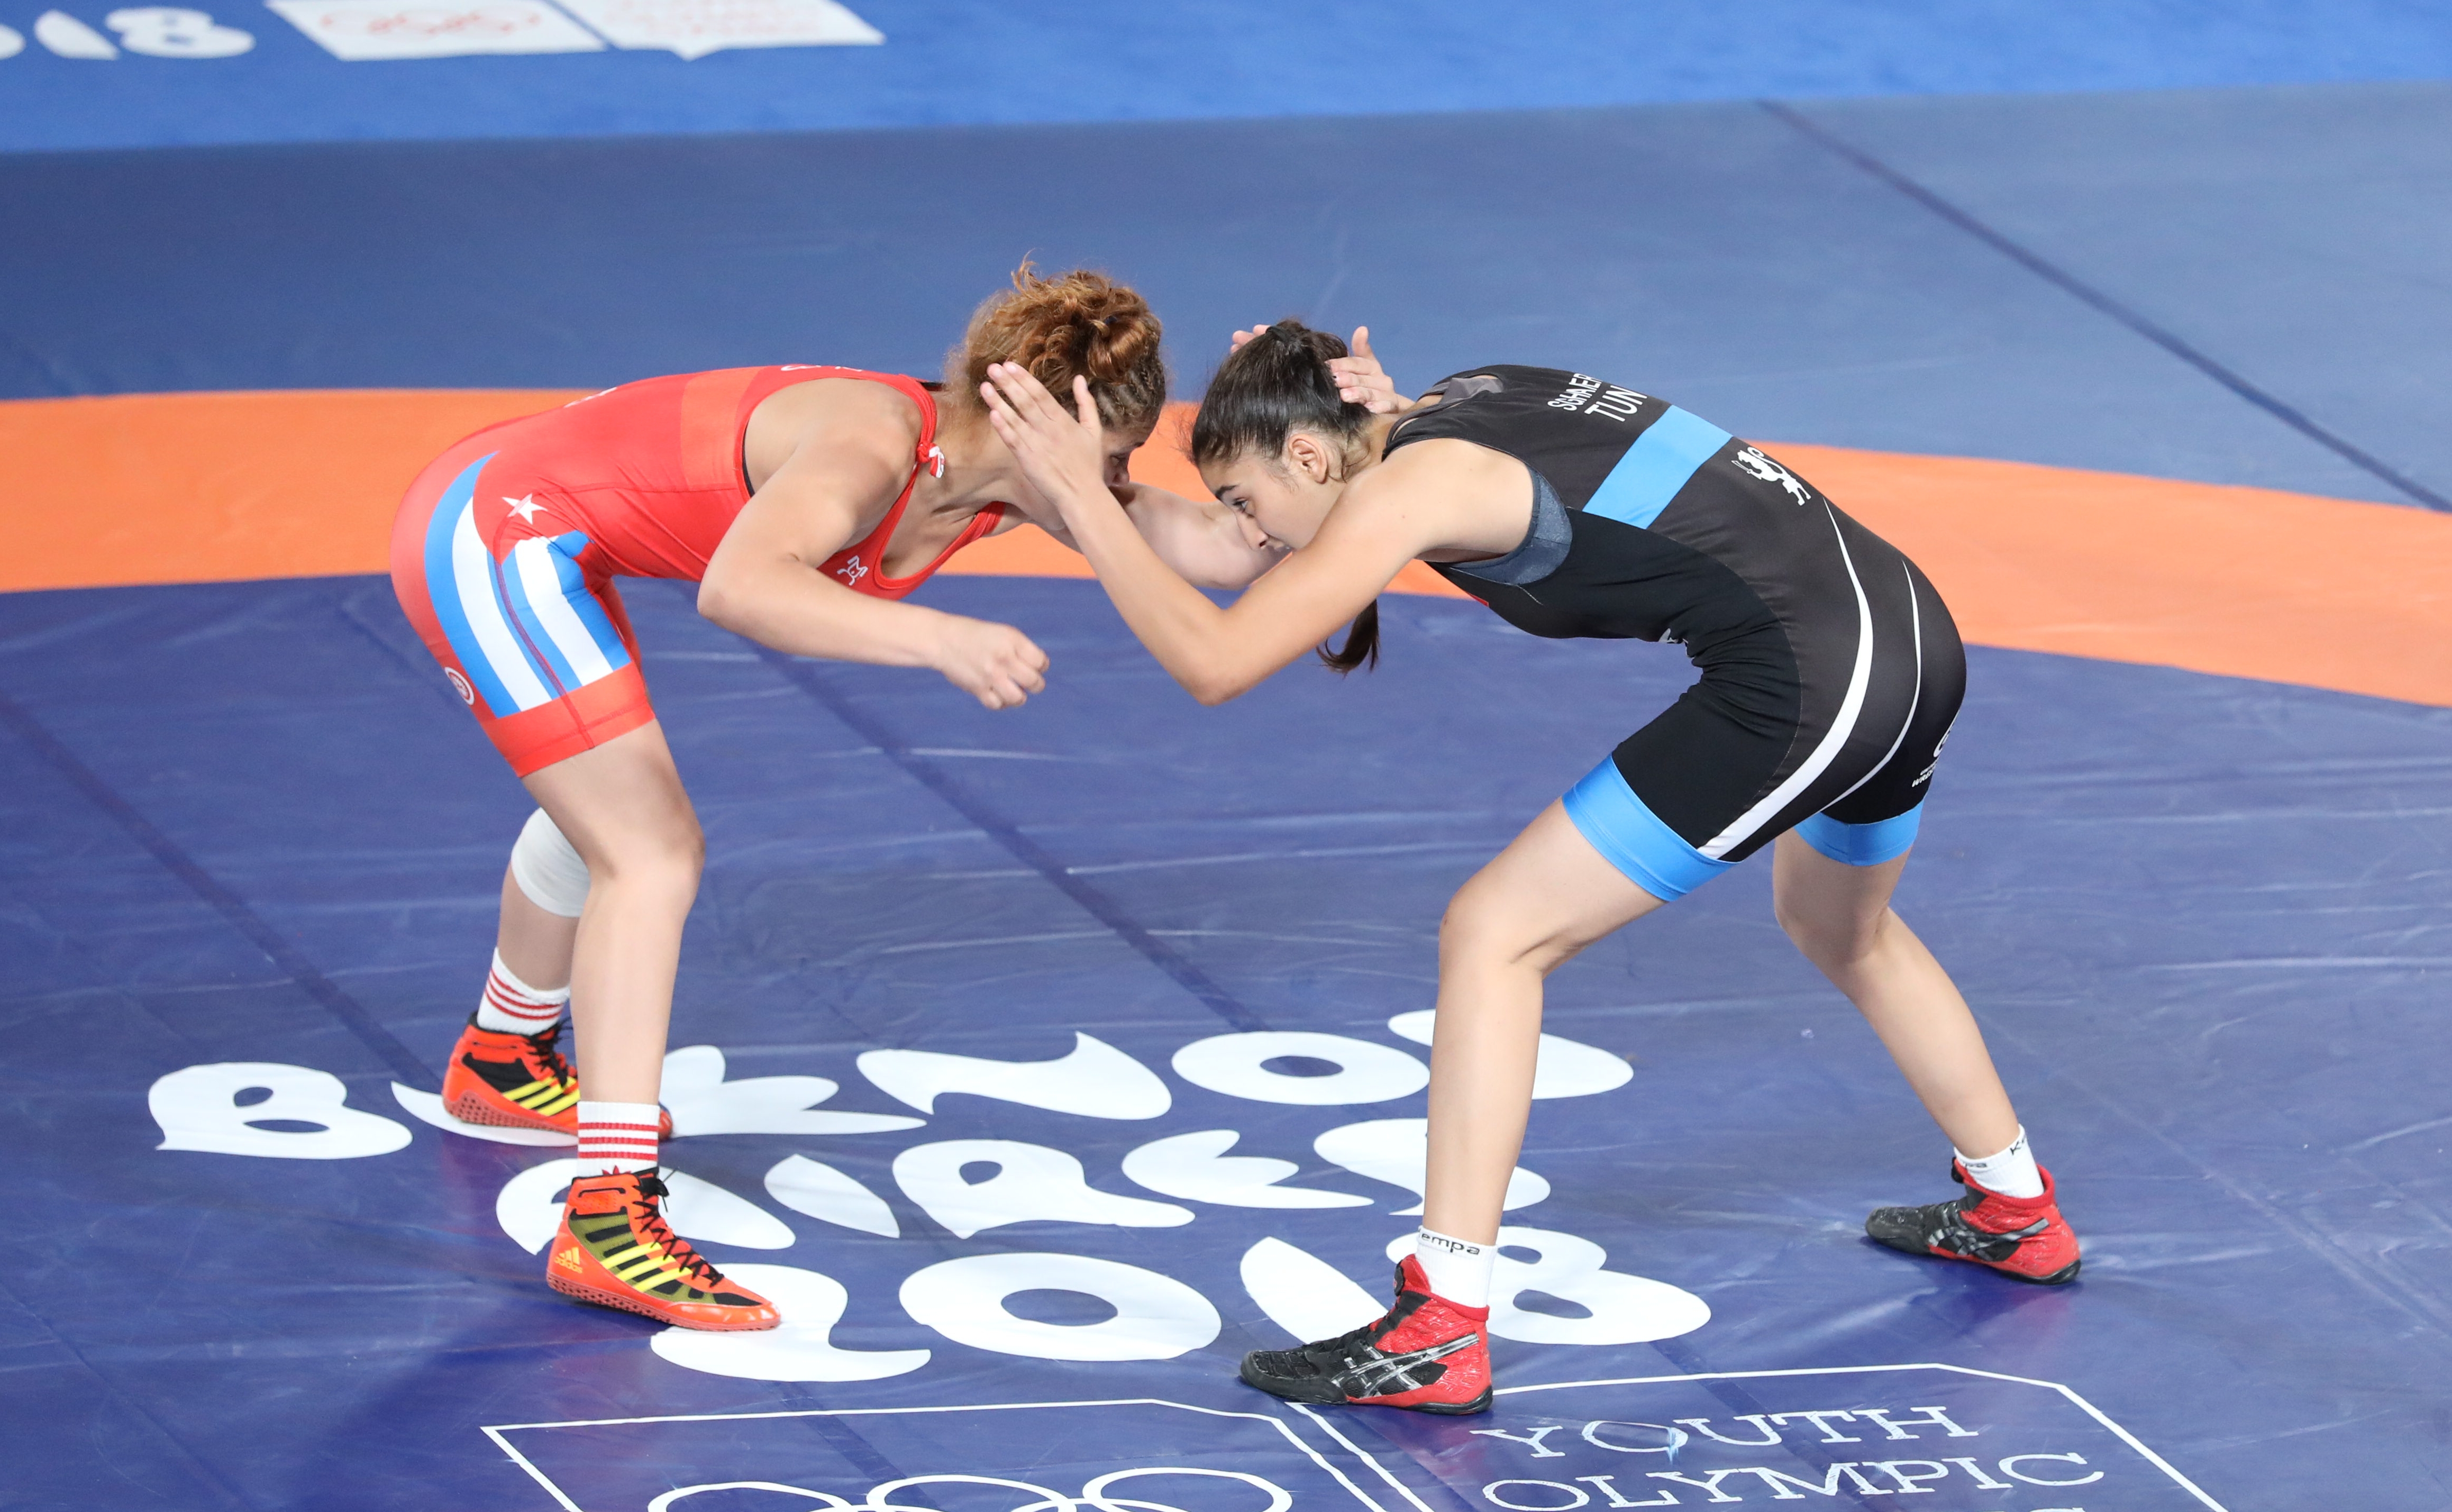 tekst Bug Overveje File:2018-10-13 7th place match (Wrestling Women's Freestyle 65kg) at 2018  Summer Youth Olympics by Sandro Halank–054.jpg - Wikimedia Commons